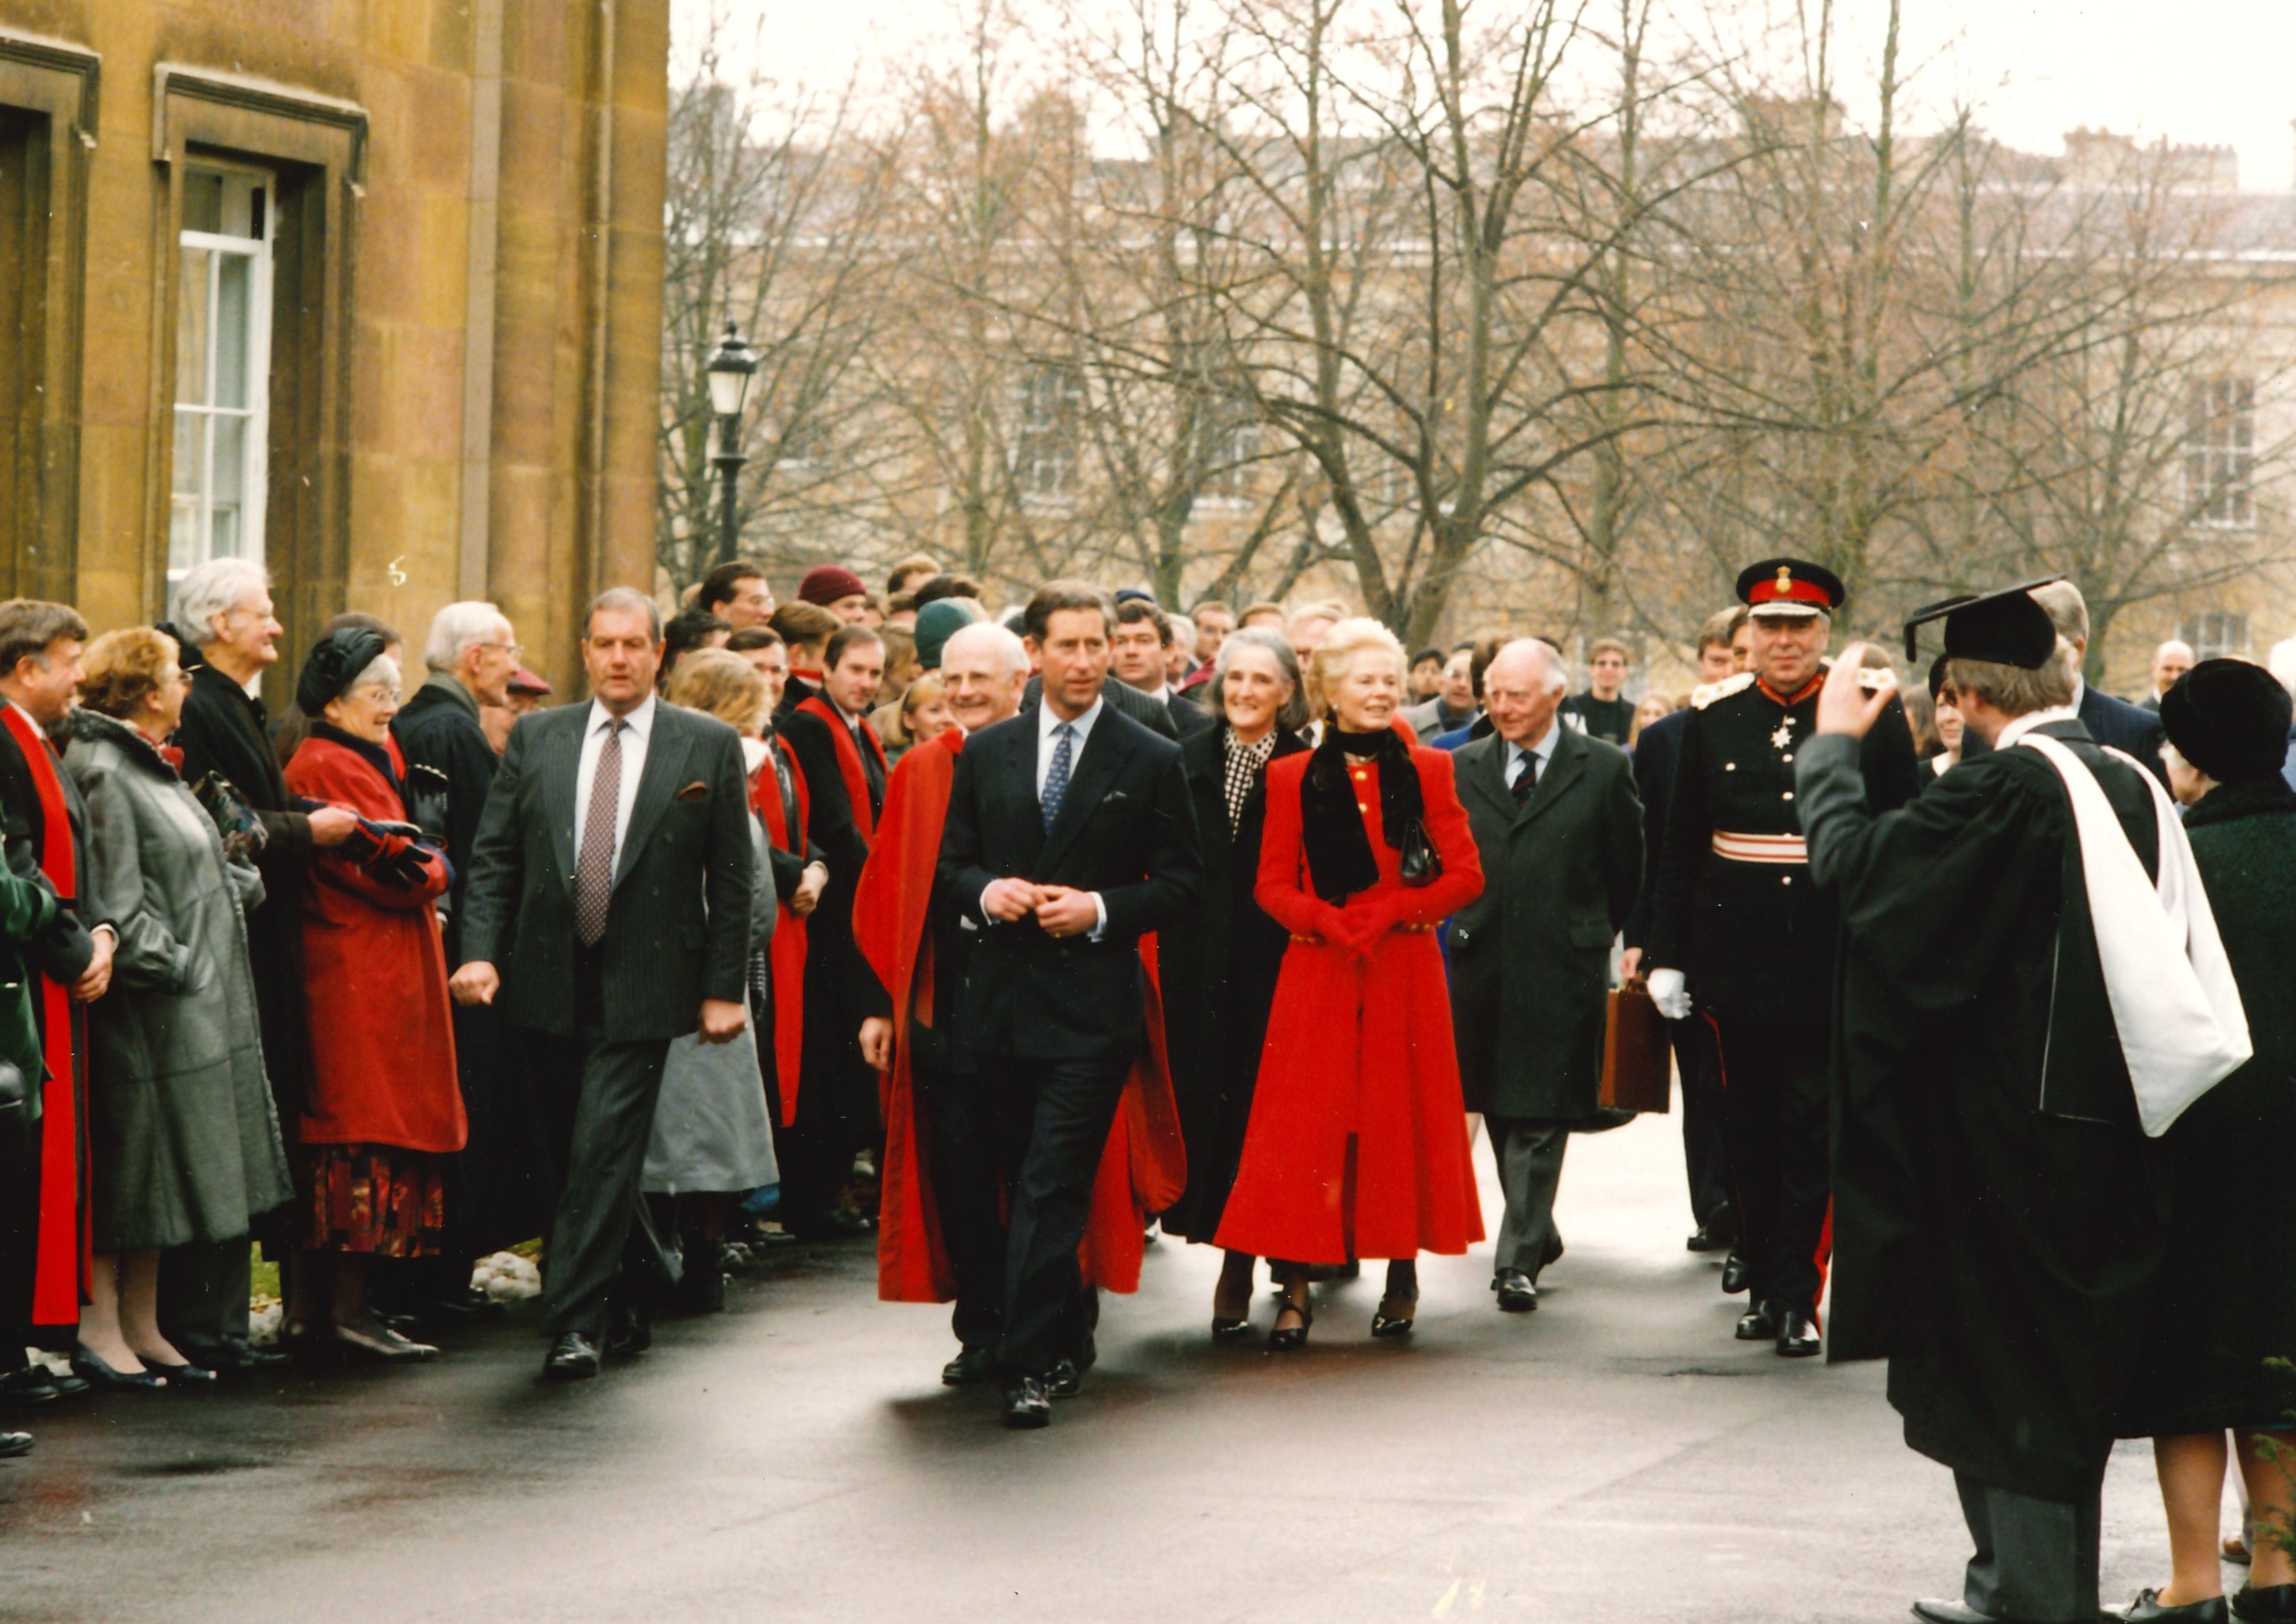 Photograph of royal guests arriving for the Library opening, 22 Nov 1993